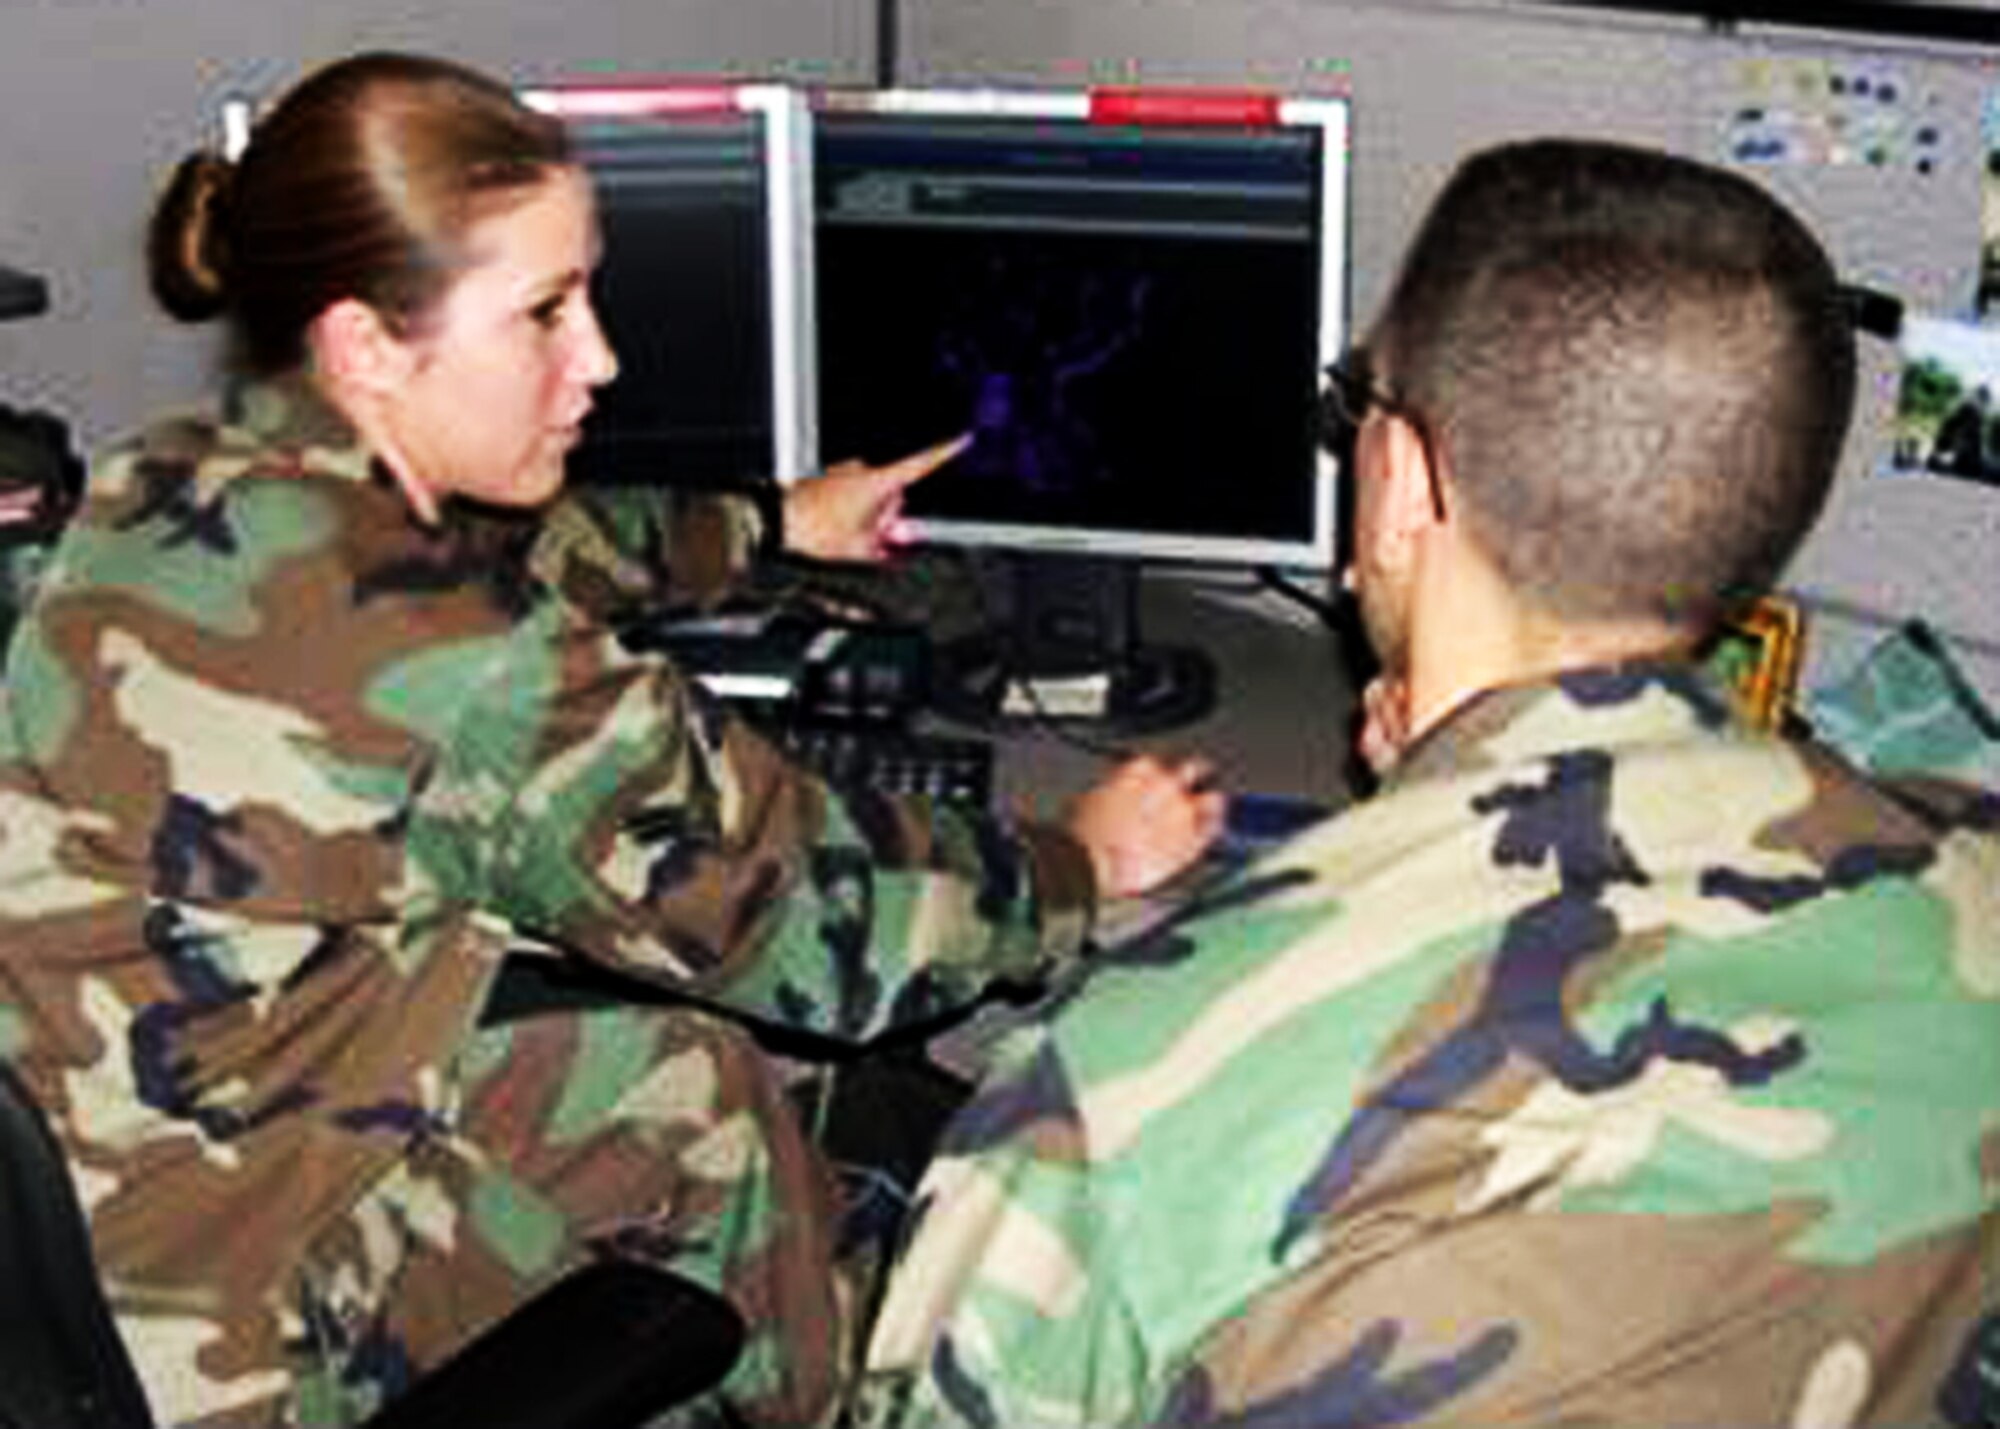 A senior analyst from the flagging flight trains a new analyst on how to detect anomalies in the signals that have been flagged. The flight is part of the 453rd Electronic Warfare Squadron. The squadron’s mission is providing timely, tailored and vigilant electronic warfare analysis and support down range to joint and coalition warfighters.  The squadron, located at Lackland Air Force Base, Texas, is part of the 53rd Wing headquartered at Eglin.  (Courtesy Photo)